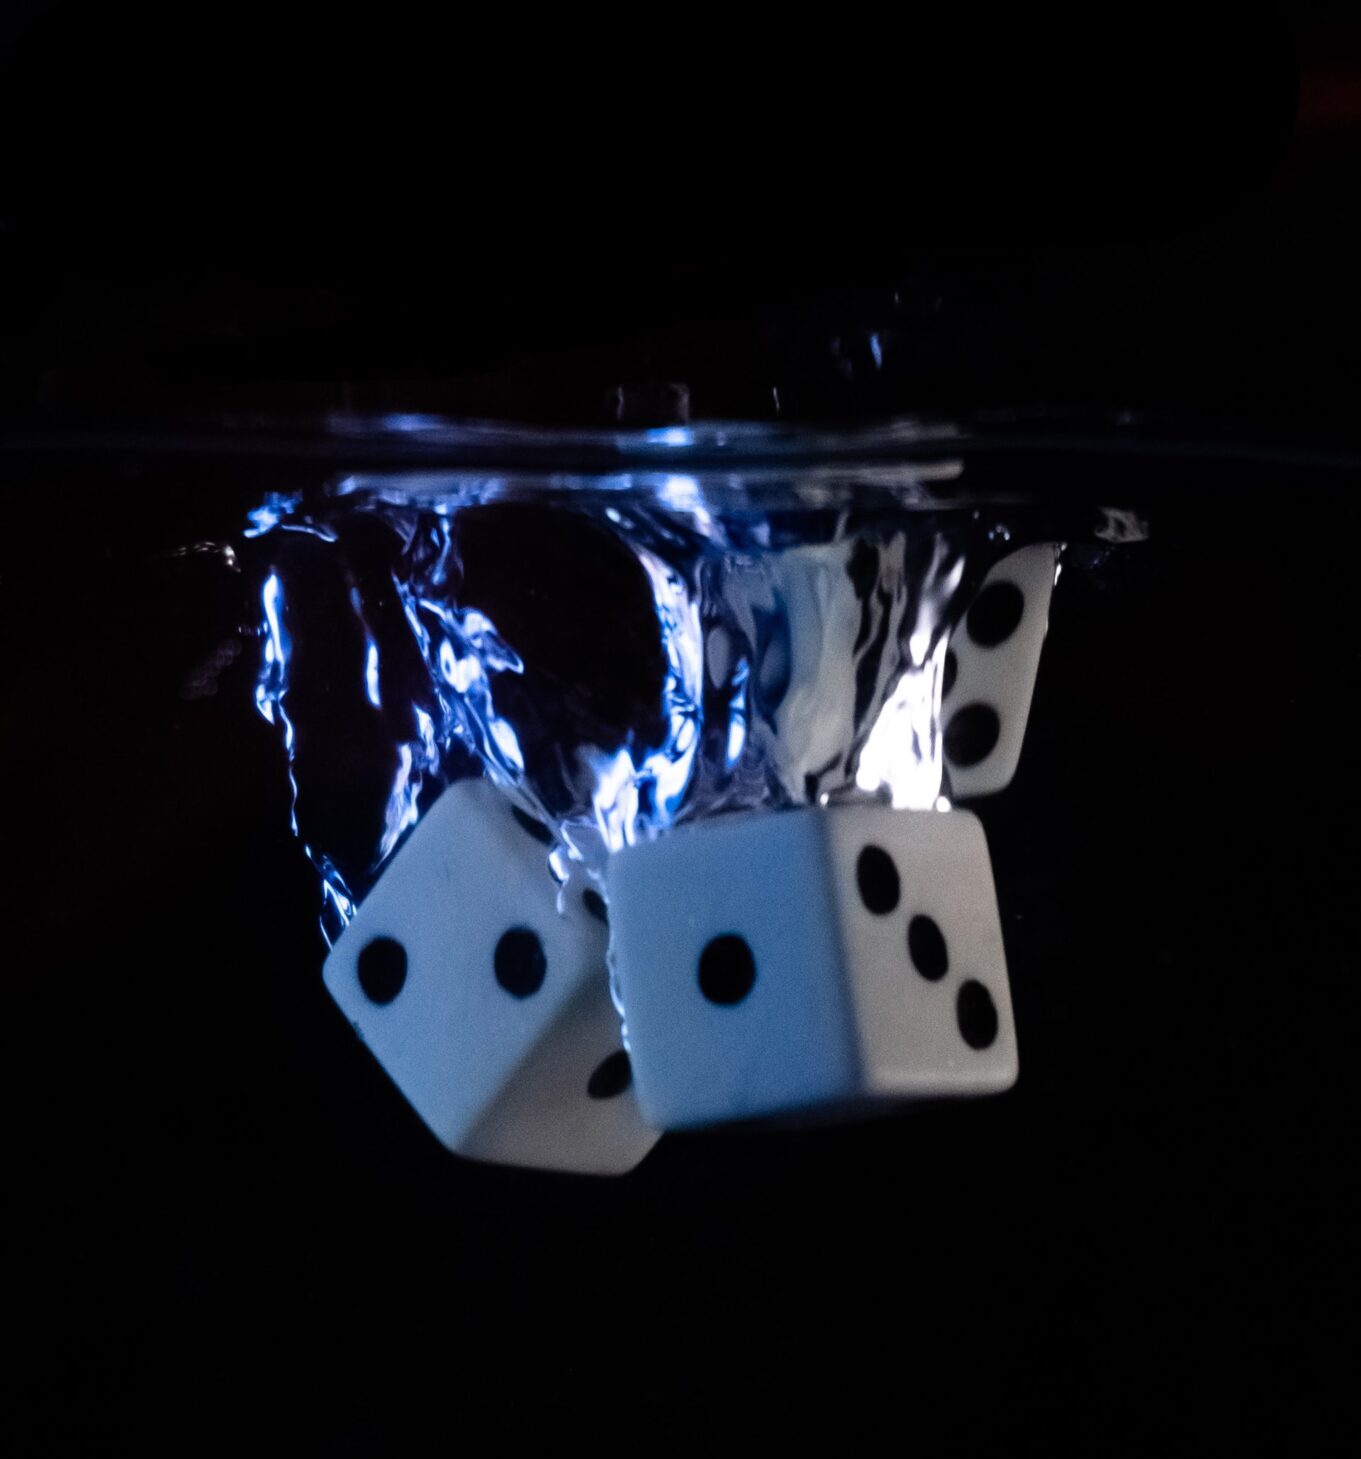 dices in water